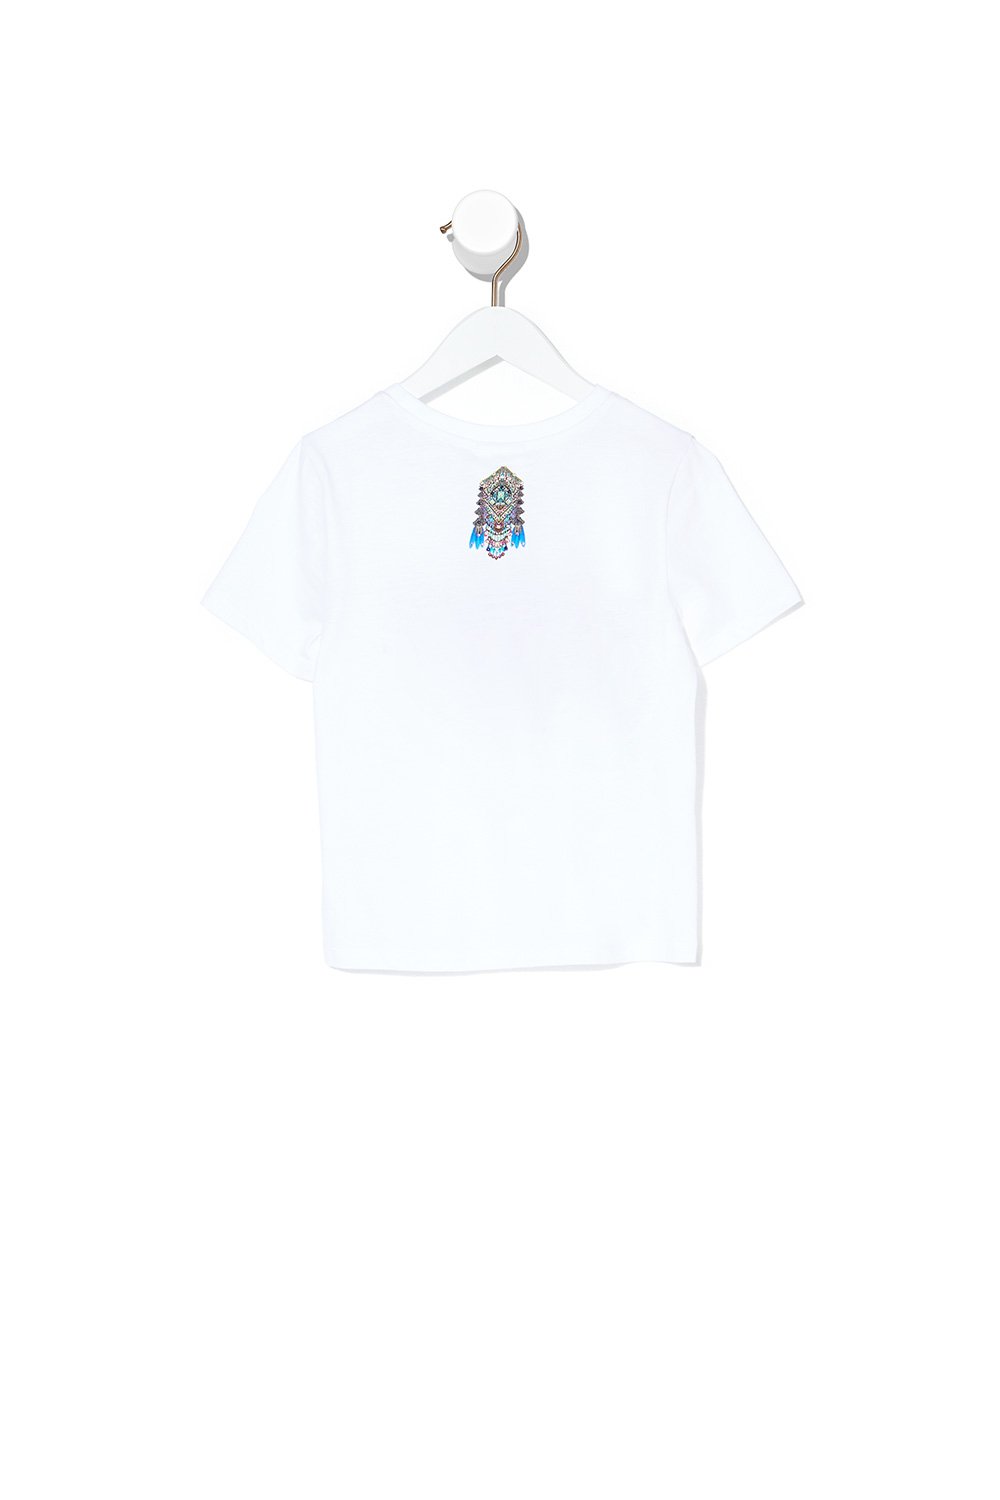 INFANTS SHORT SLEEVE T-SHIRT LOVE ON THE WING